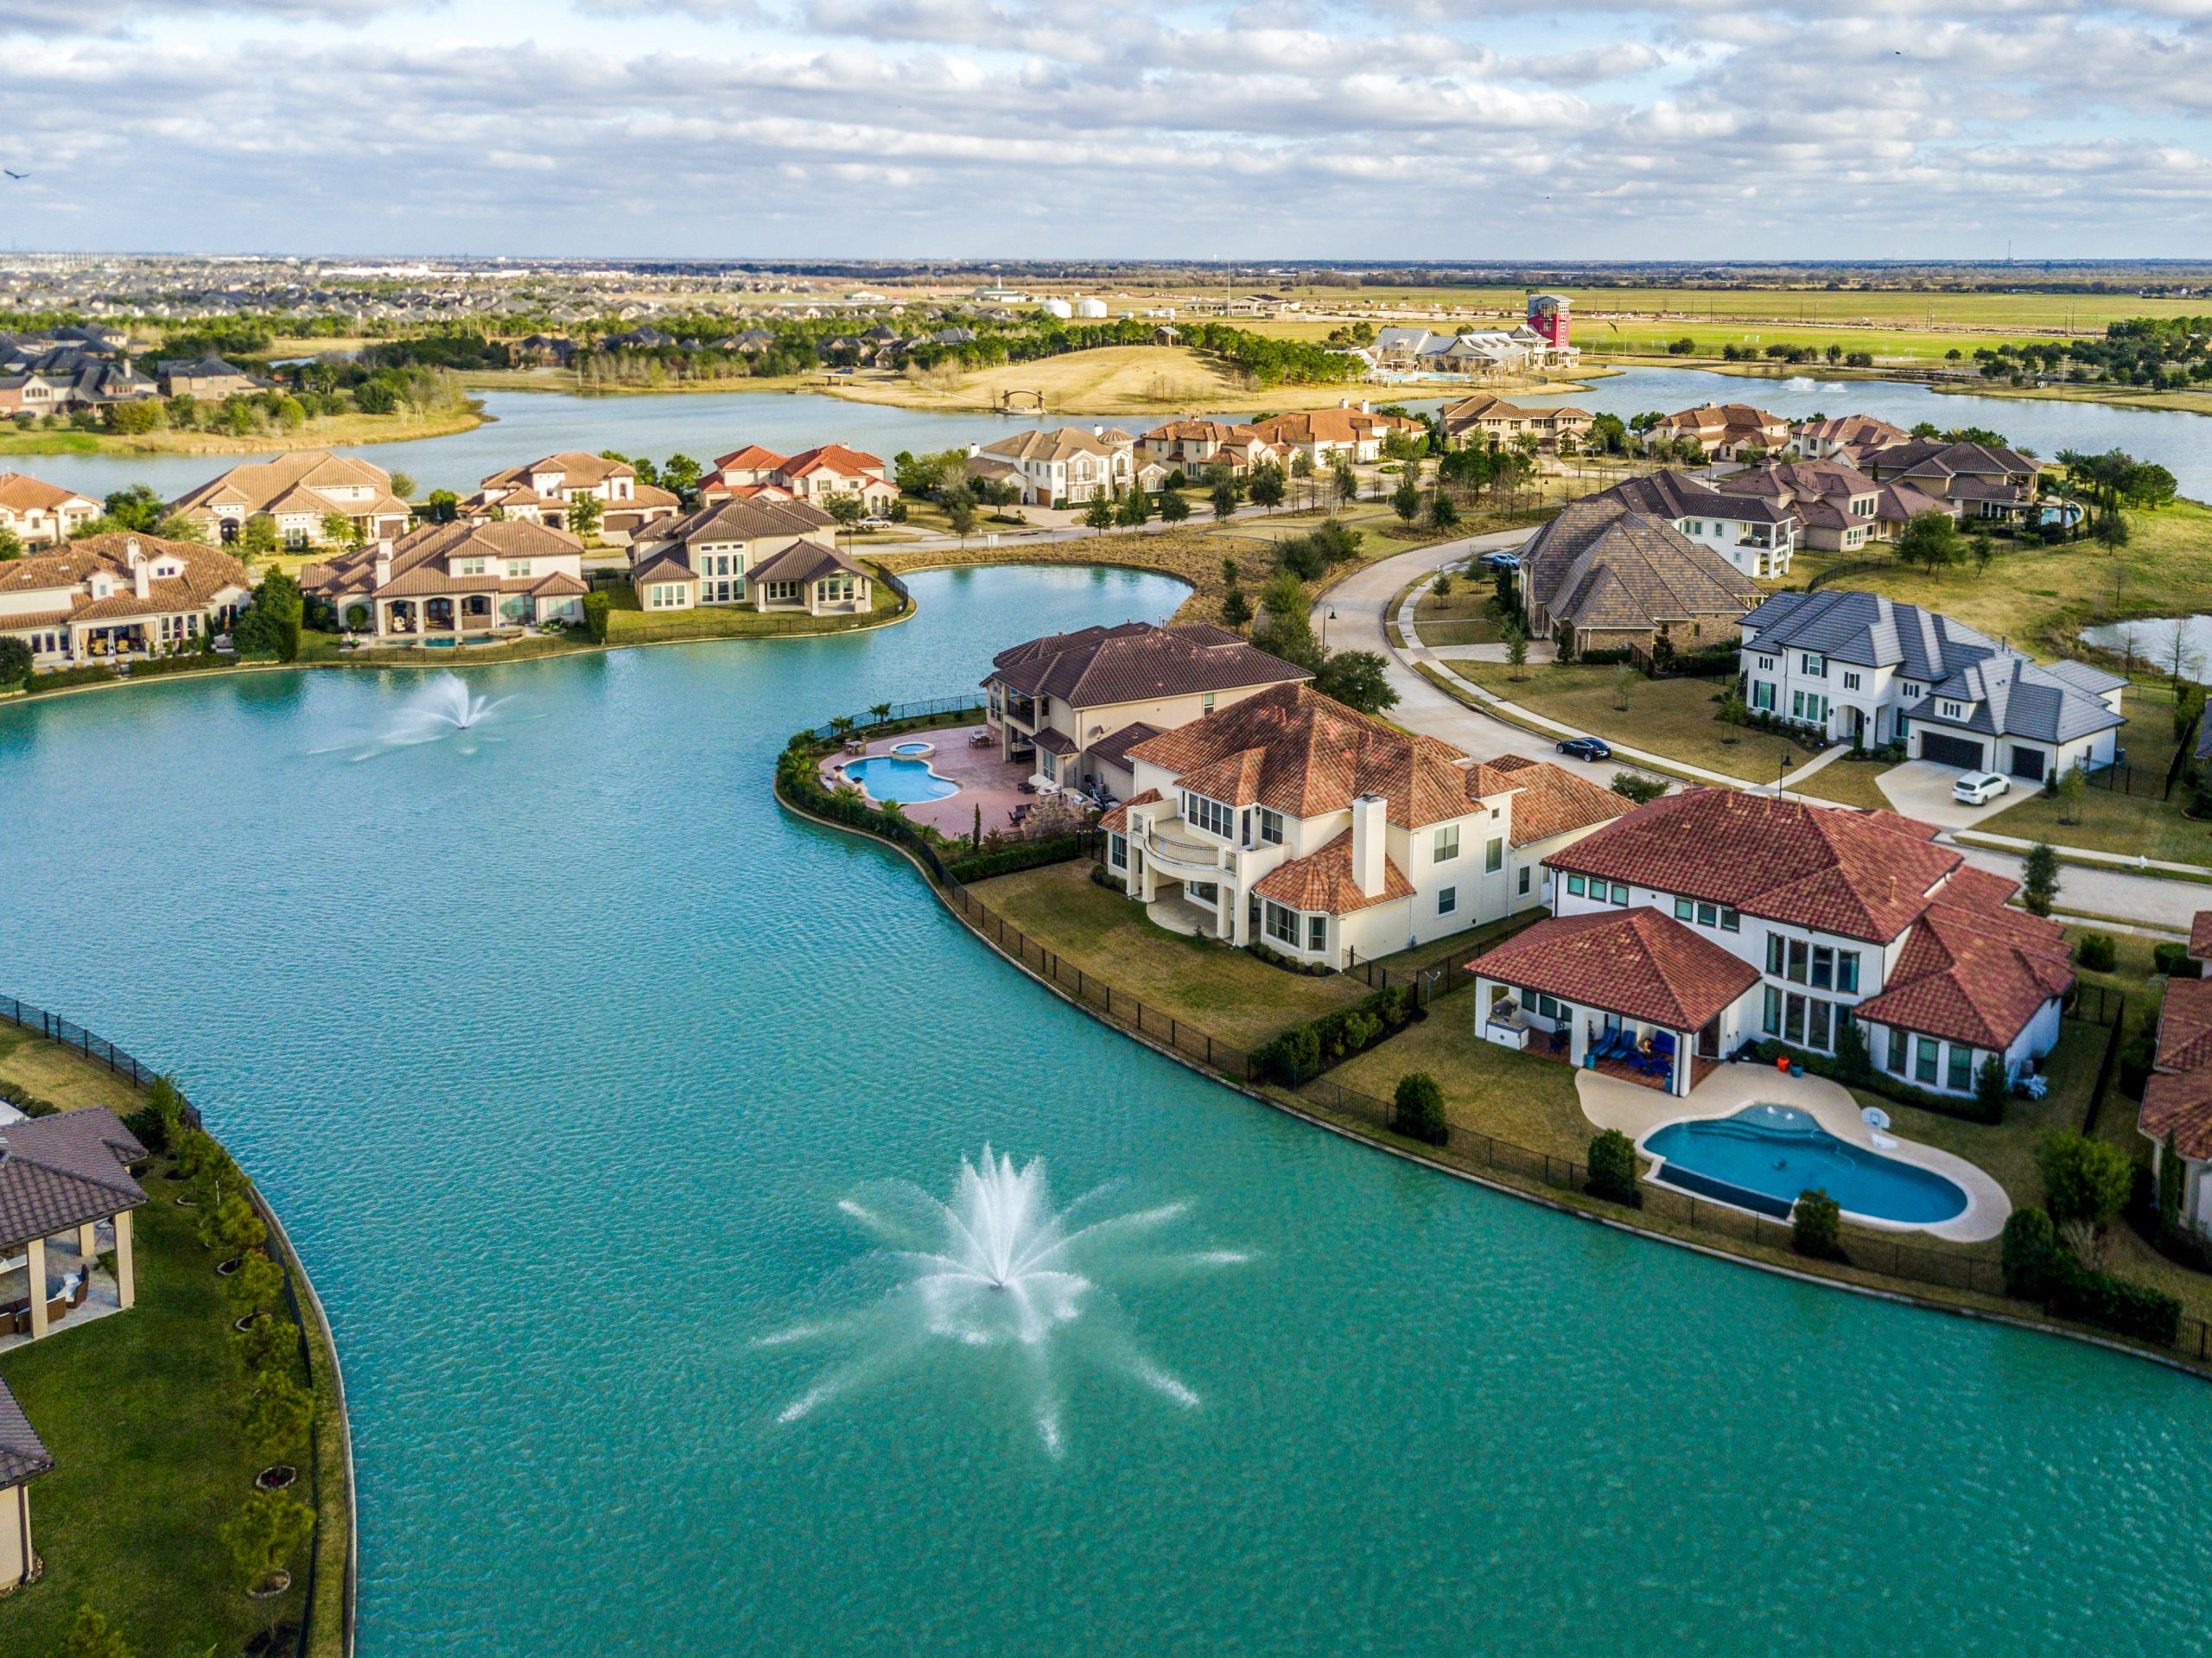 drone view of a residential neighborhood with a large pond and waterfront properties